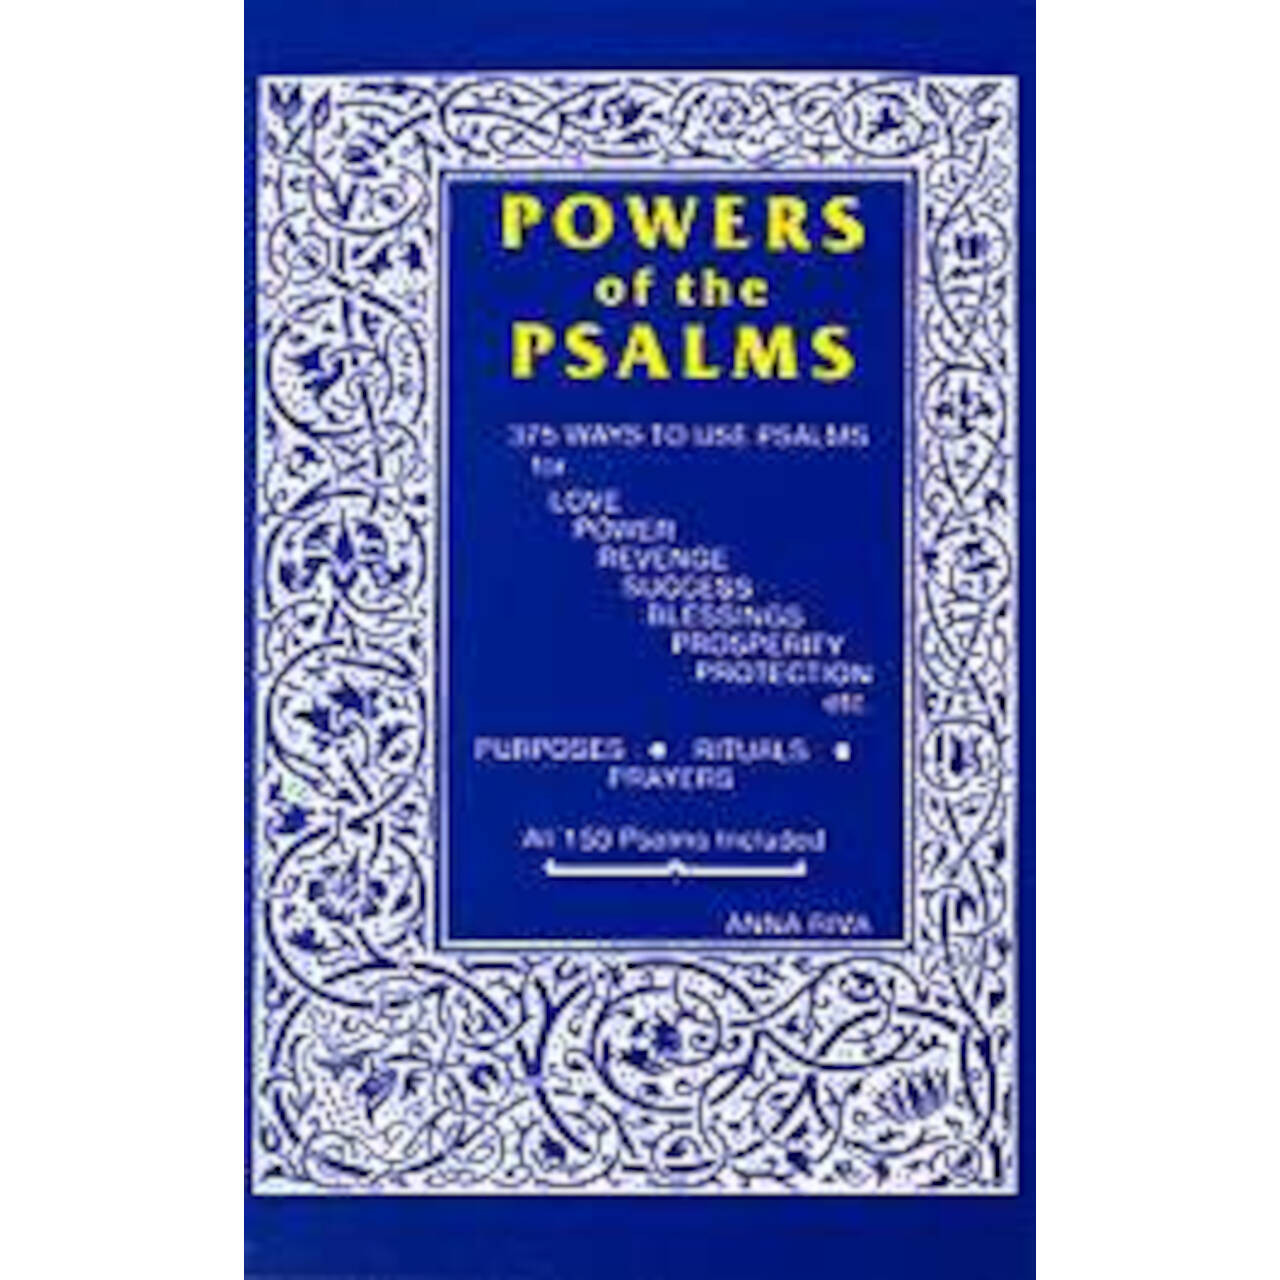 Powers Of The Psalms By Anna Riva